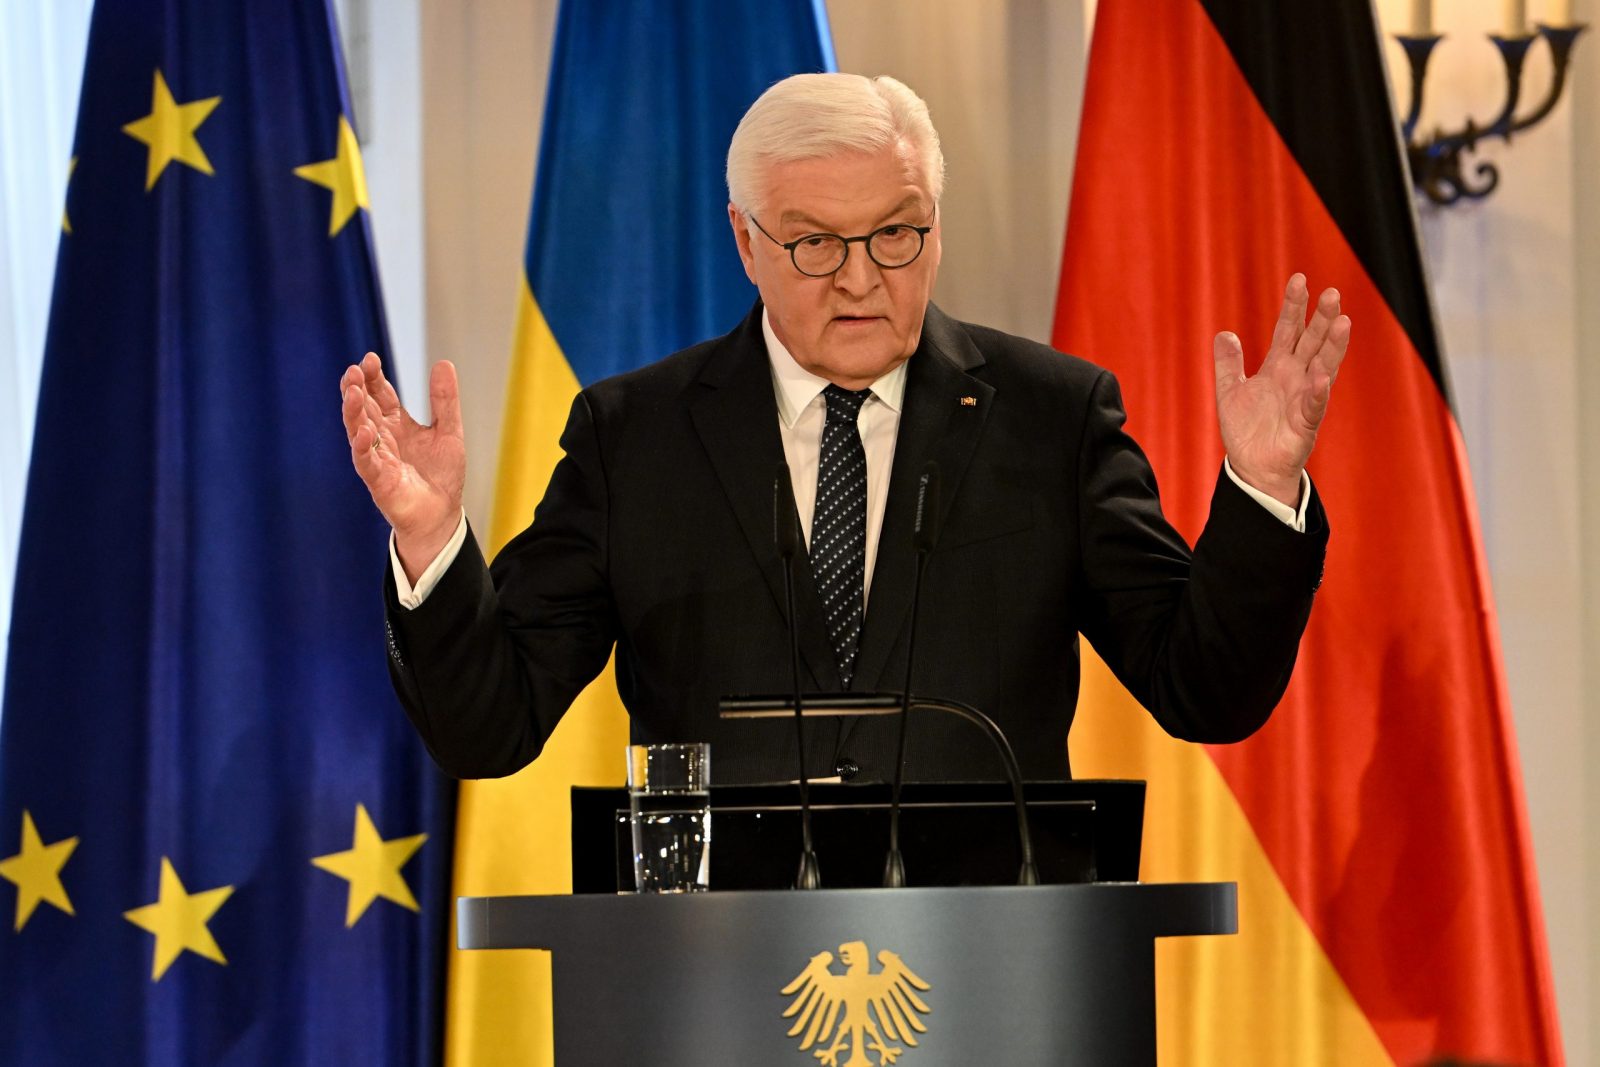 epa10487561 German President Frank-Walter Steinmeier speaks during a commemorative event marking the first anniversary of the Russian invasion of Ukraine, at Bellevue palace in Berlin, Germany, 24 February 2023. Russian troops entered Ukrainian territory on 24 February 2022, starting a conflict that has provoked destruction and a humanitarian crisis. One year on, fighting continues in many parts of the country.  EPA/FILIP SINGER